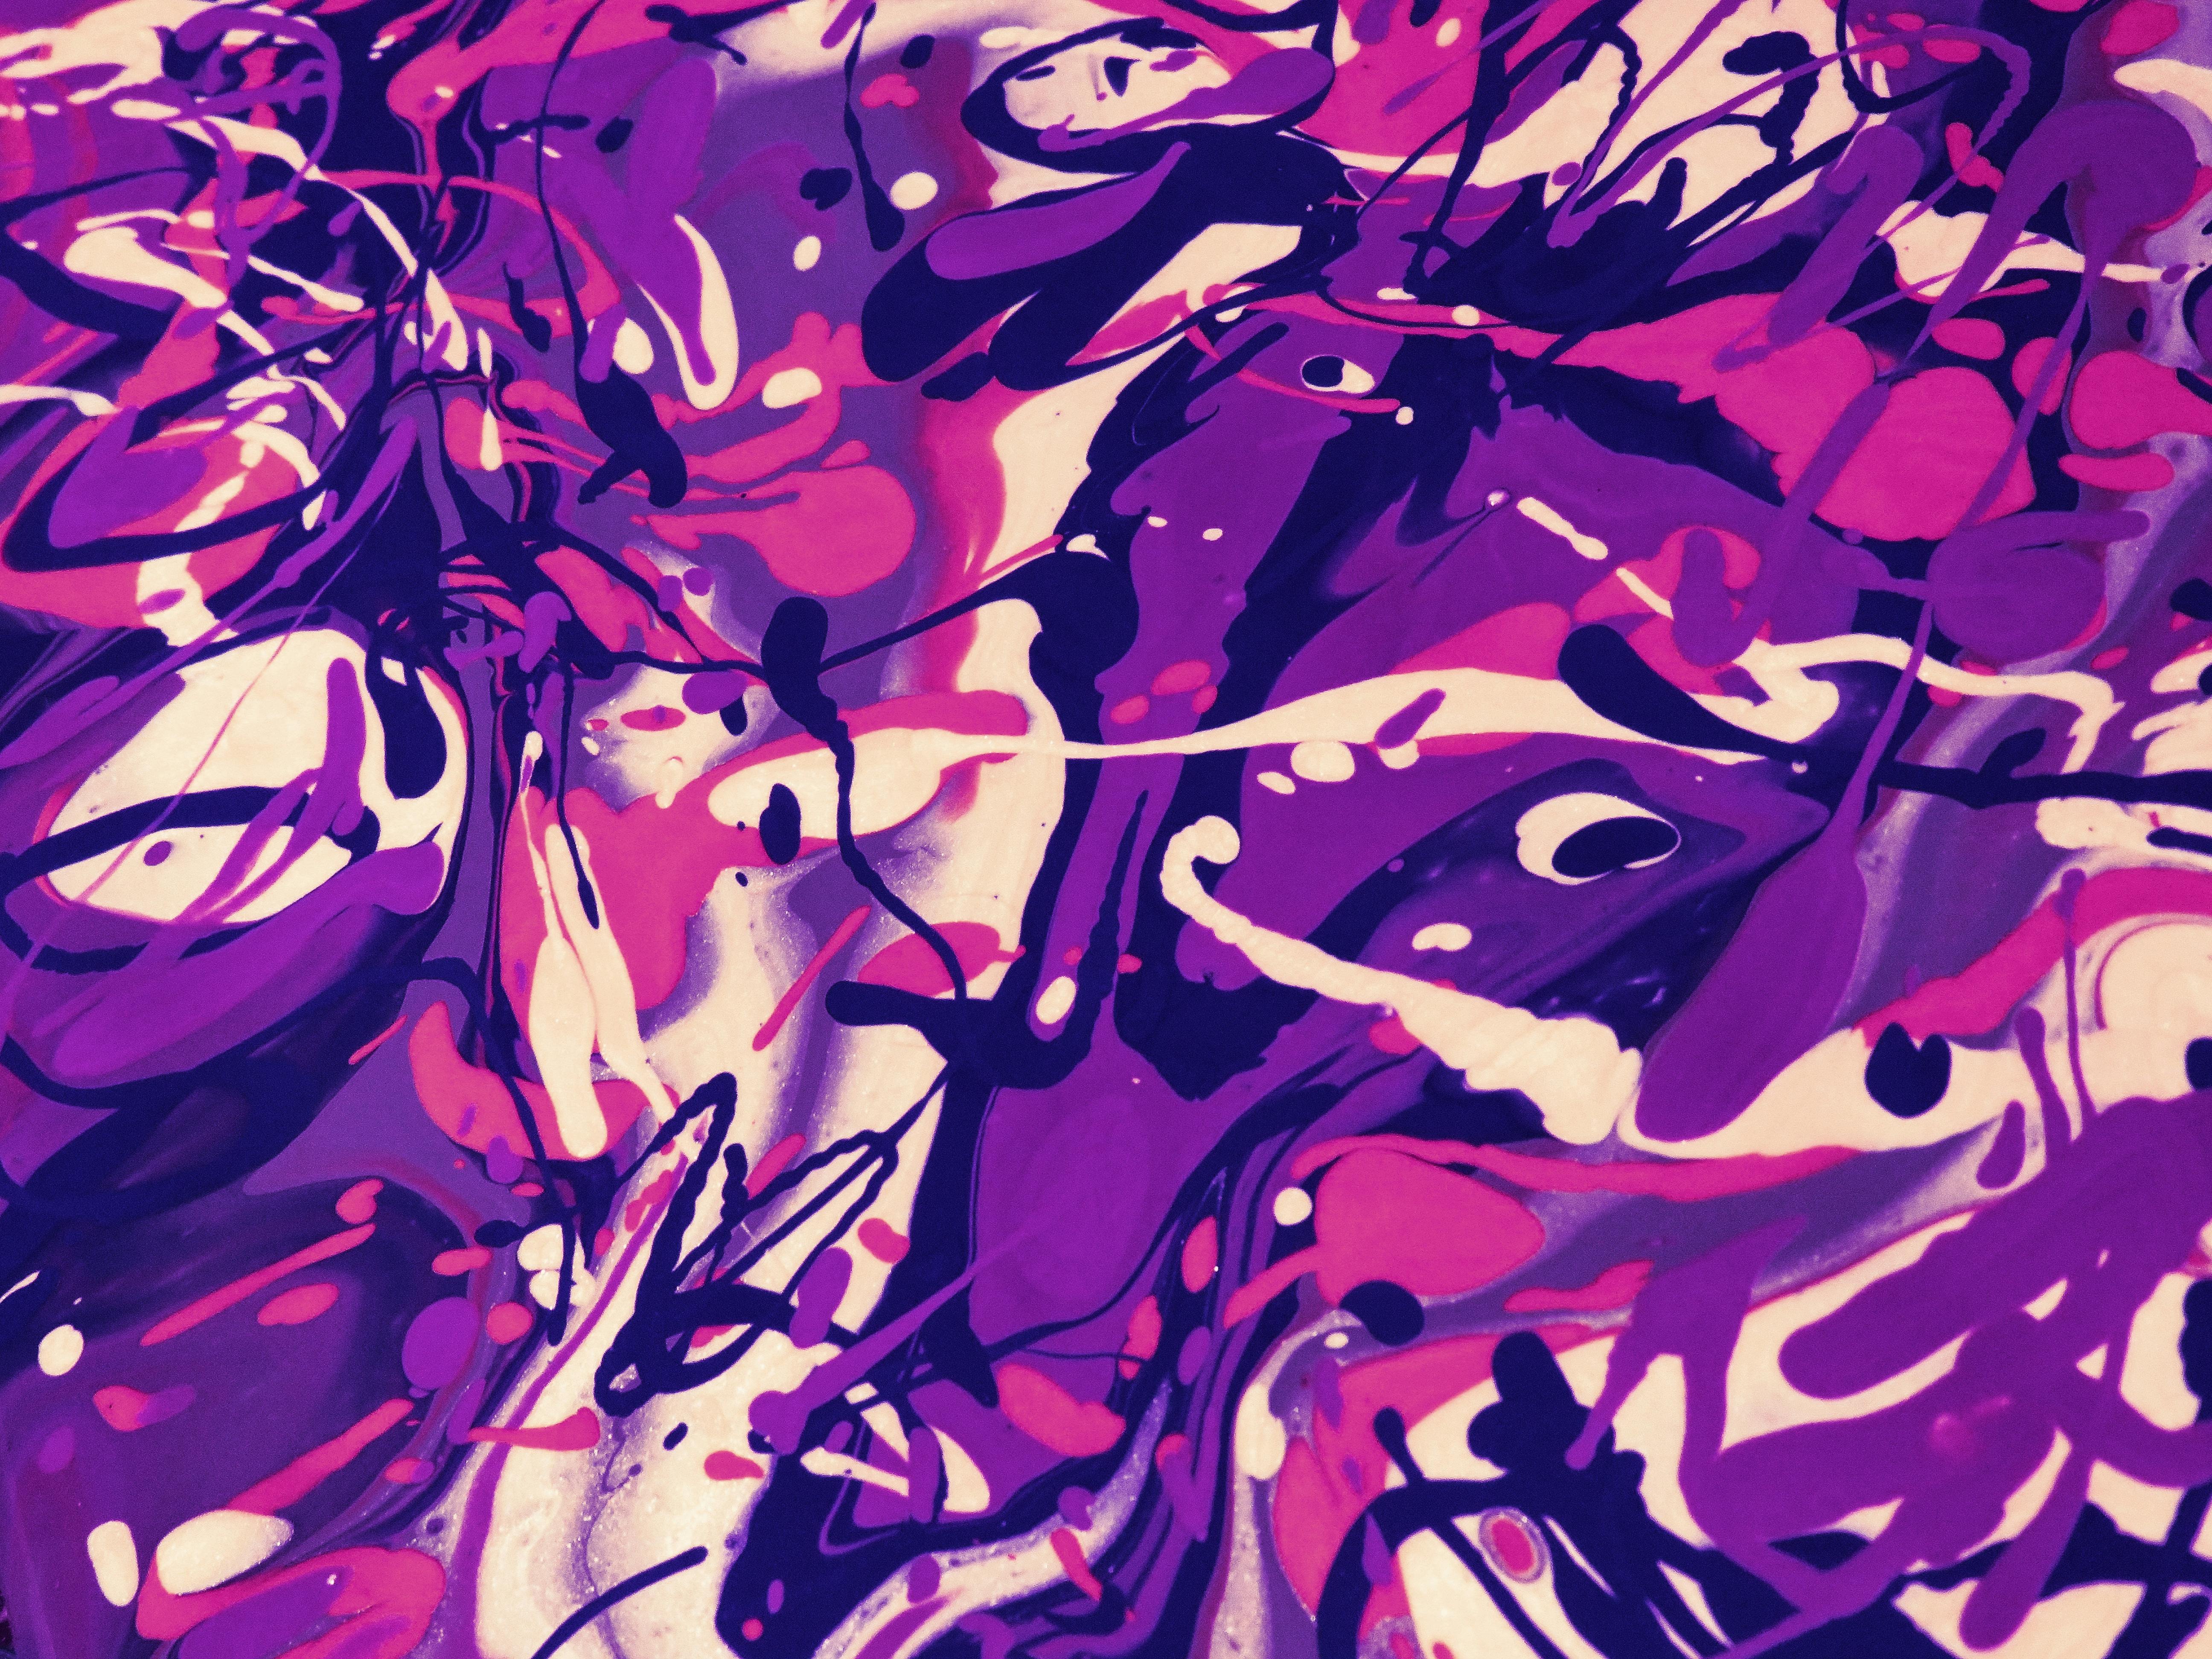 Purple, White, Black, and Pink Abstract Painting · Free Stock Photo